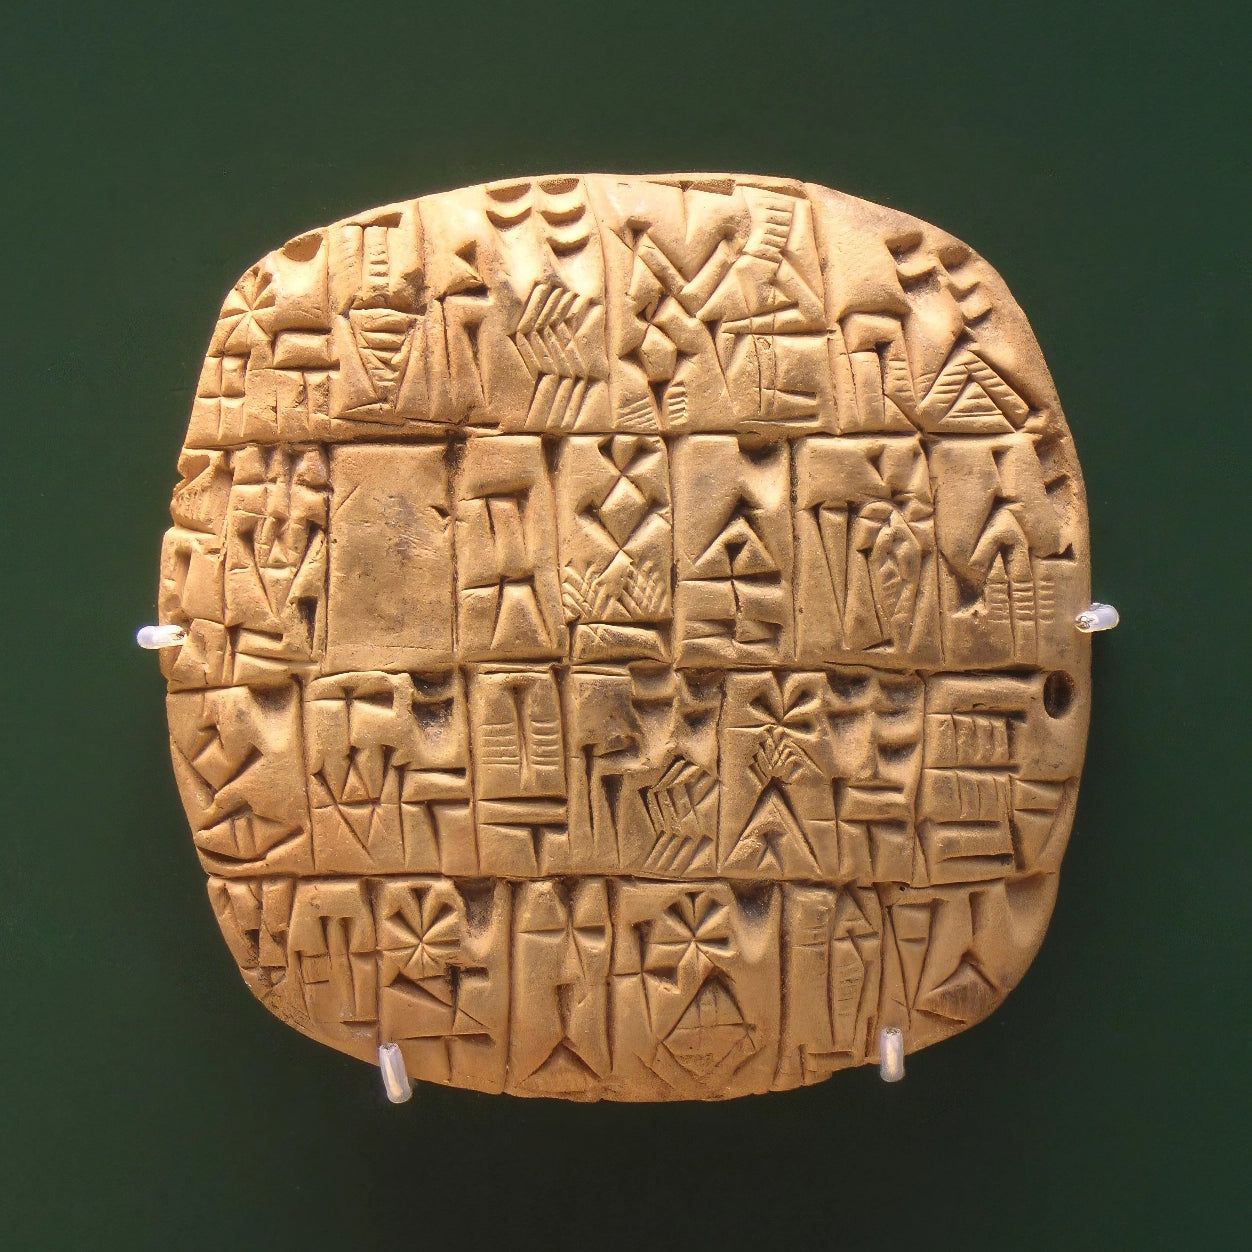 Early Sumerian, c. 2,500 BC tablet. The Cuneiform text details accounts of a governor’s silver.